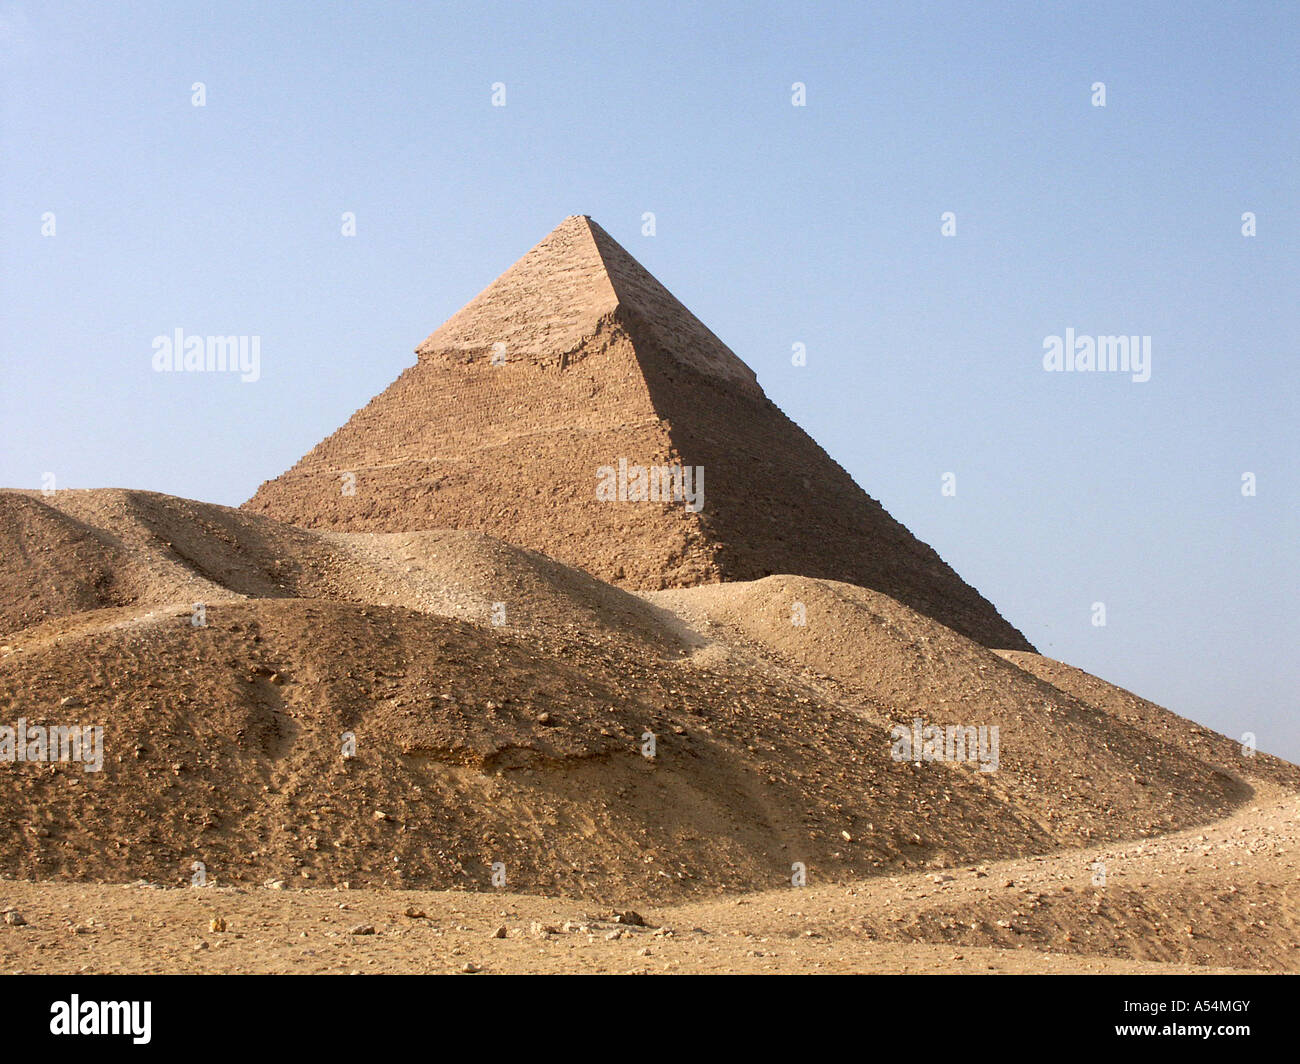 Painet ip1670 egypt pyramids giza 2002 country developing nation less economically developed culture emerging market Stock Photo